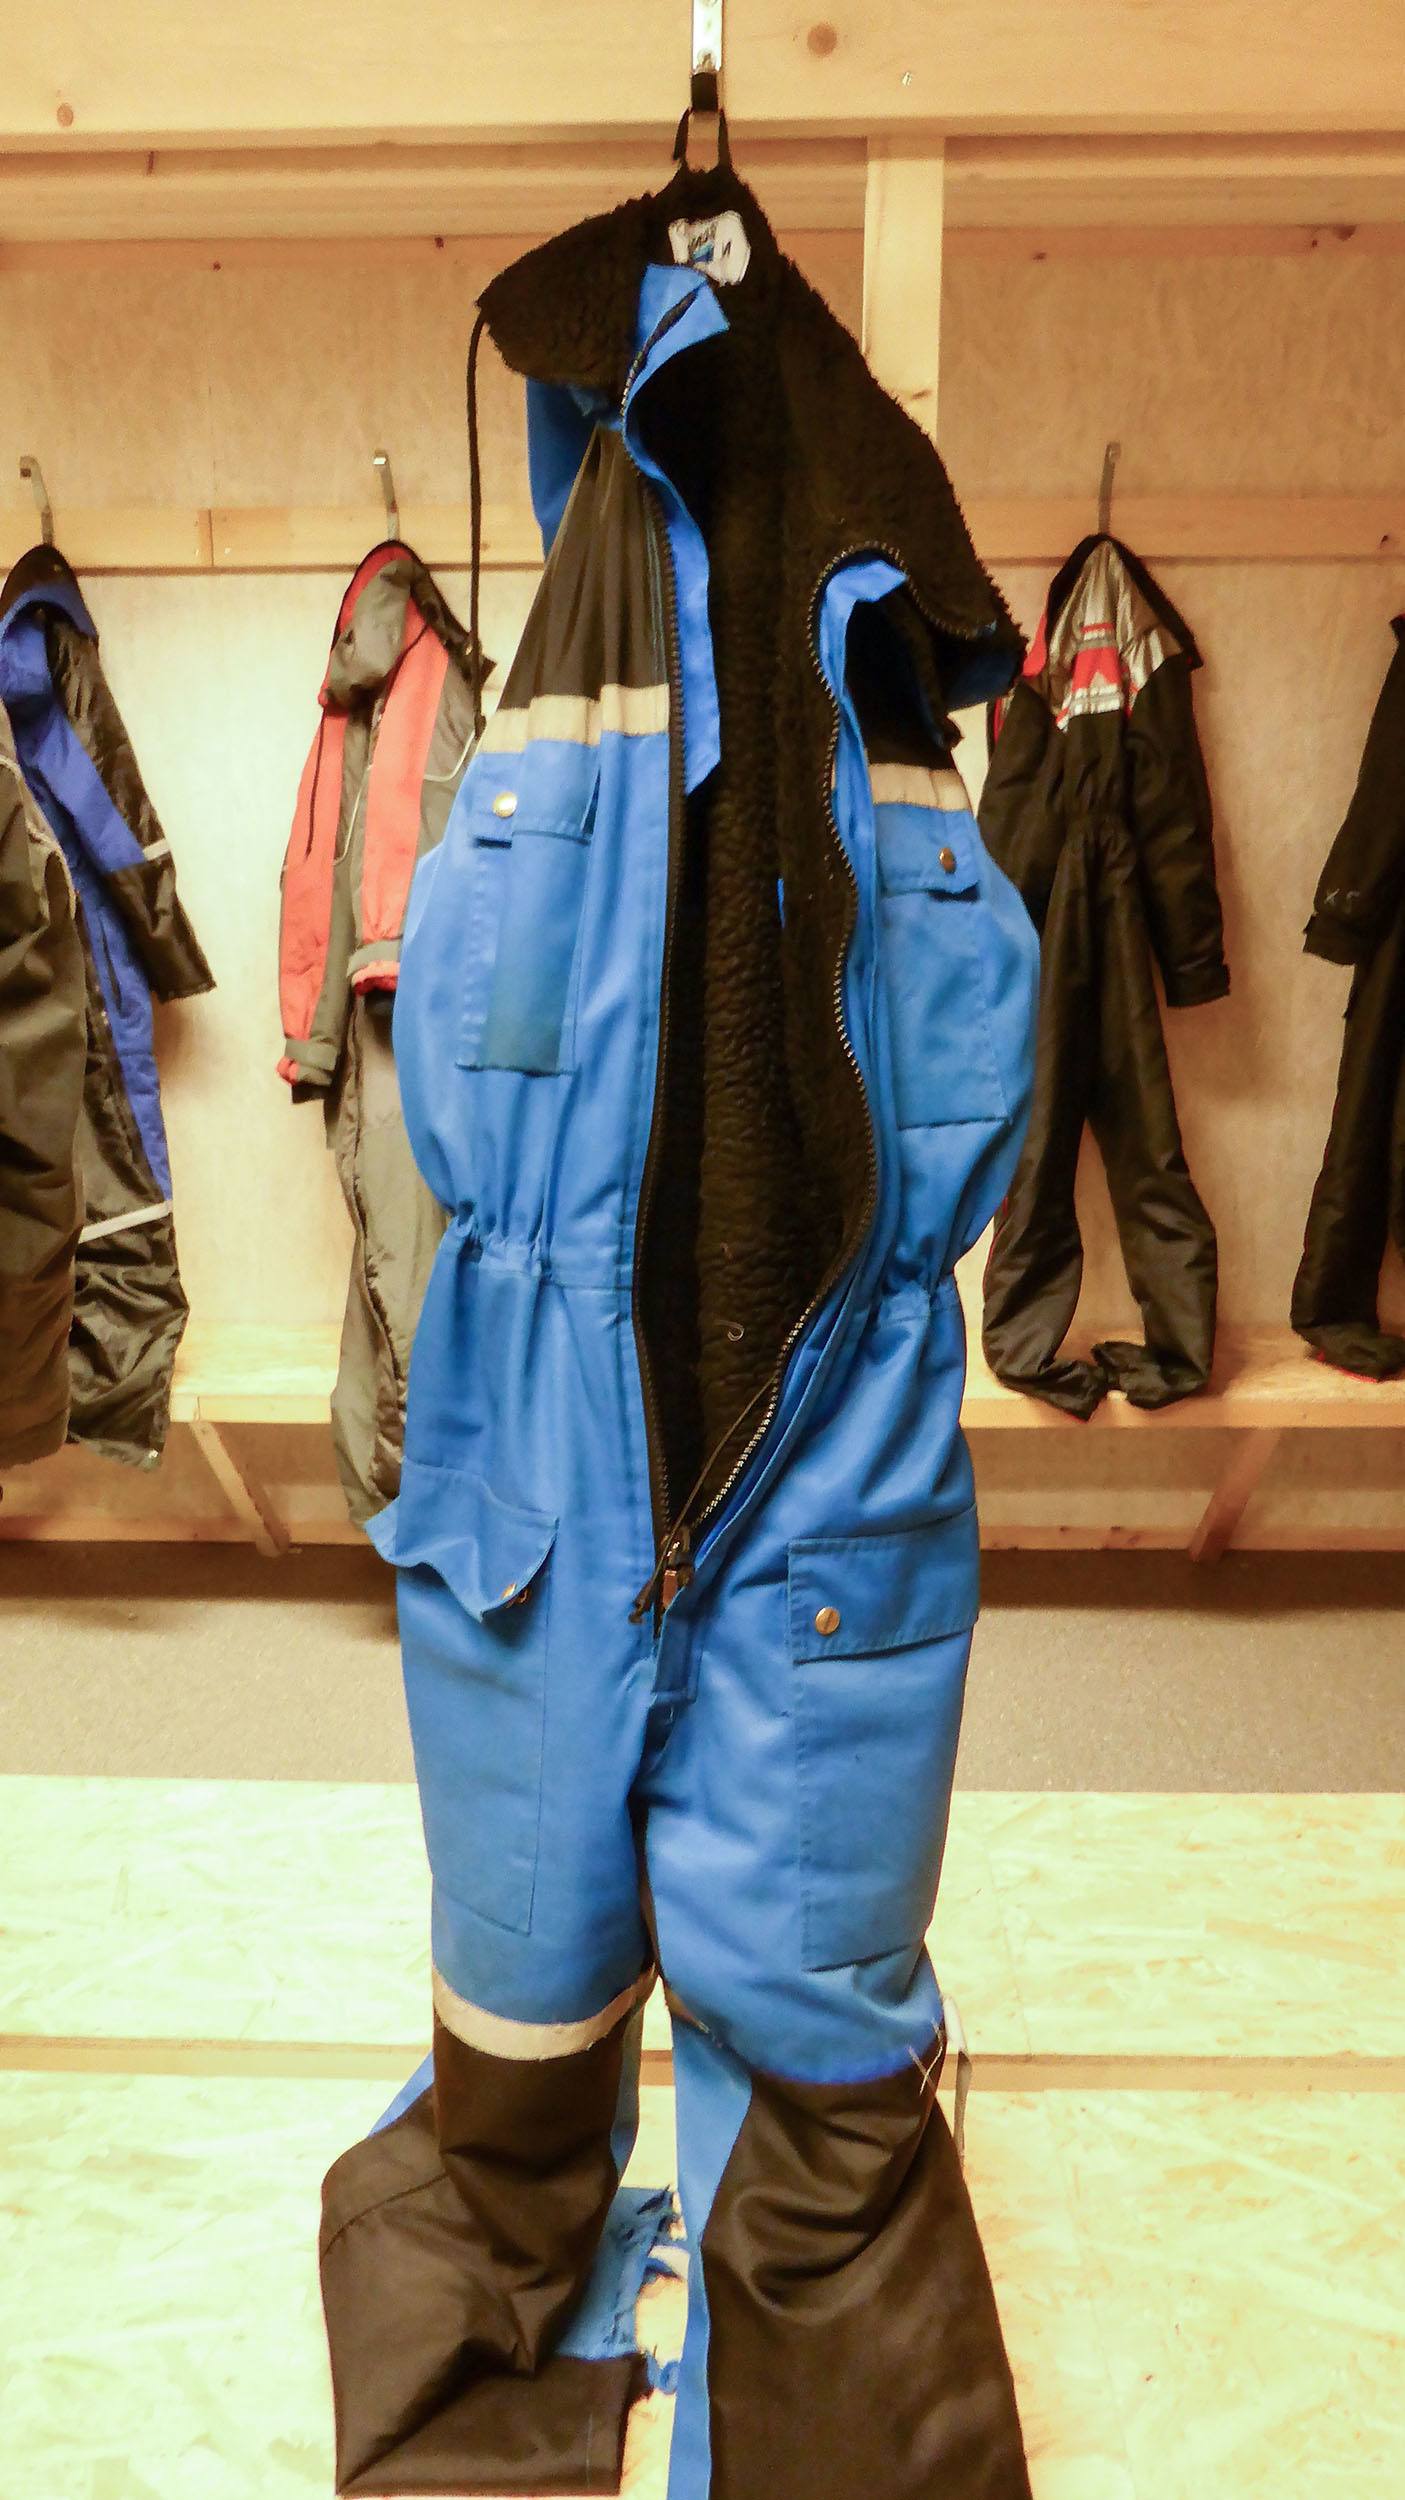 A snowsuit used at Camp Alta Sweden for riding snowmobiles